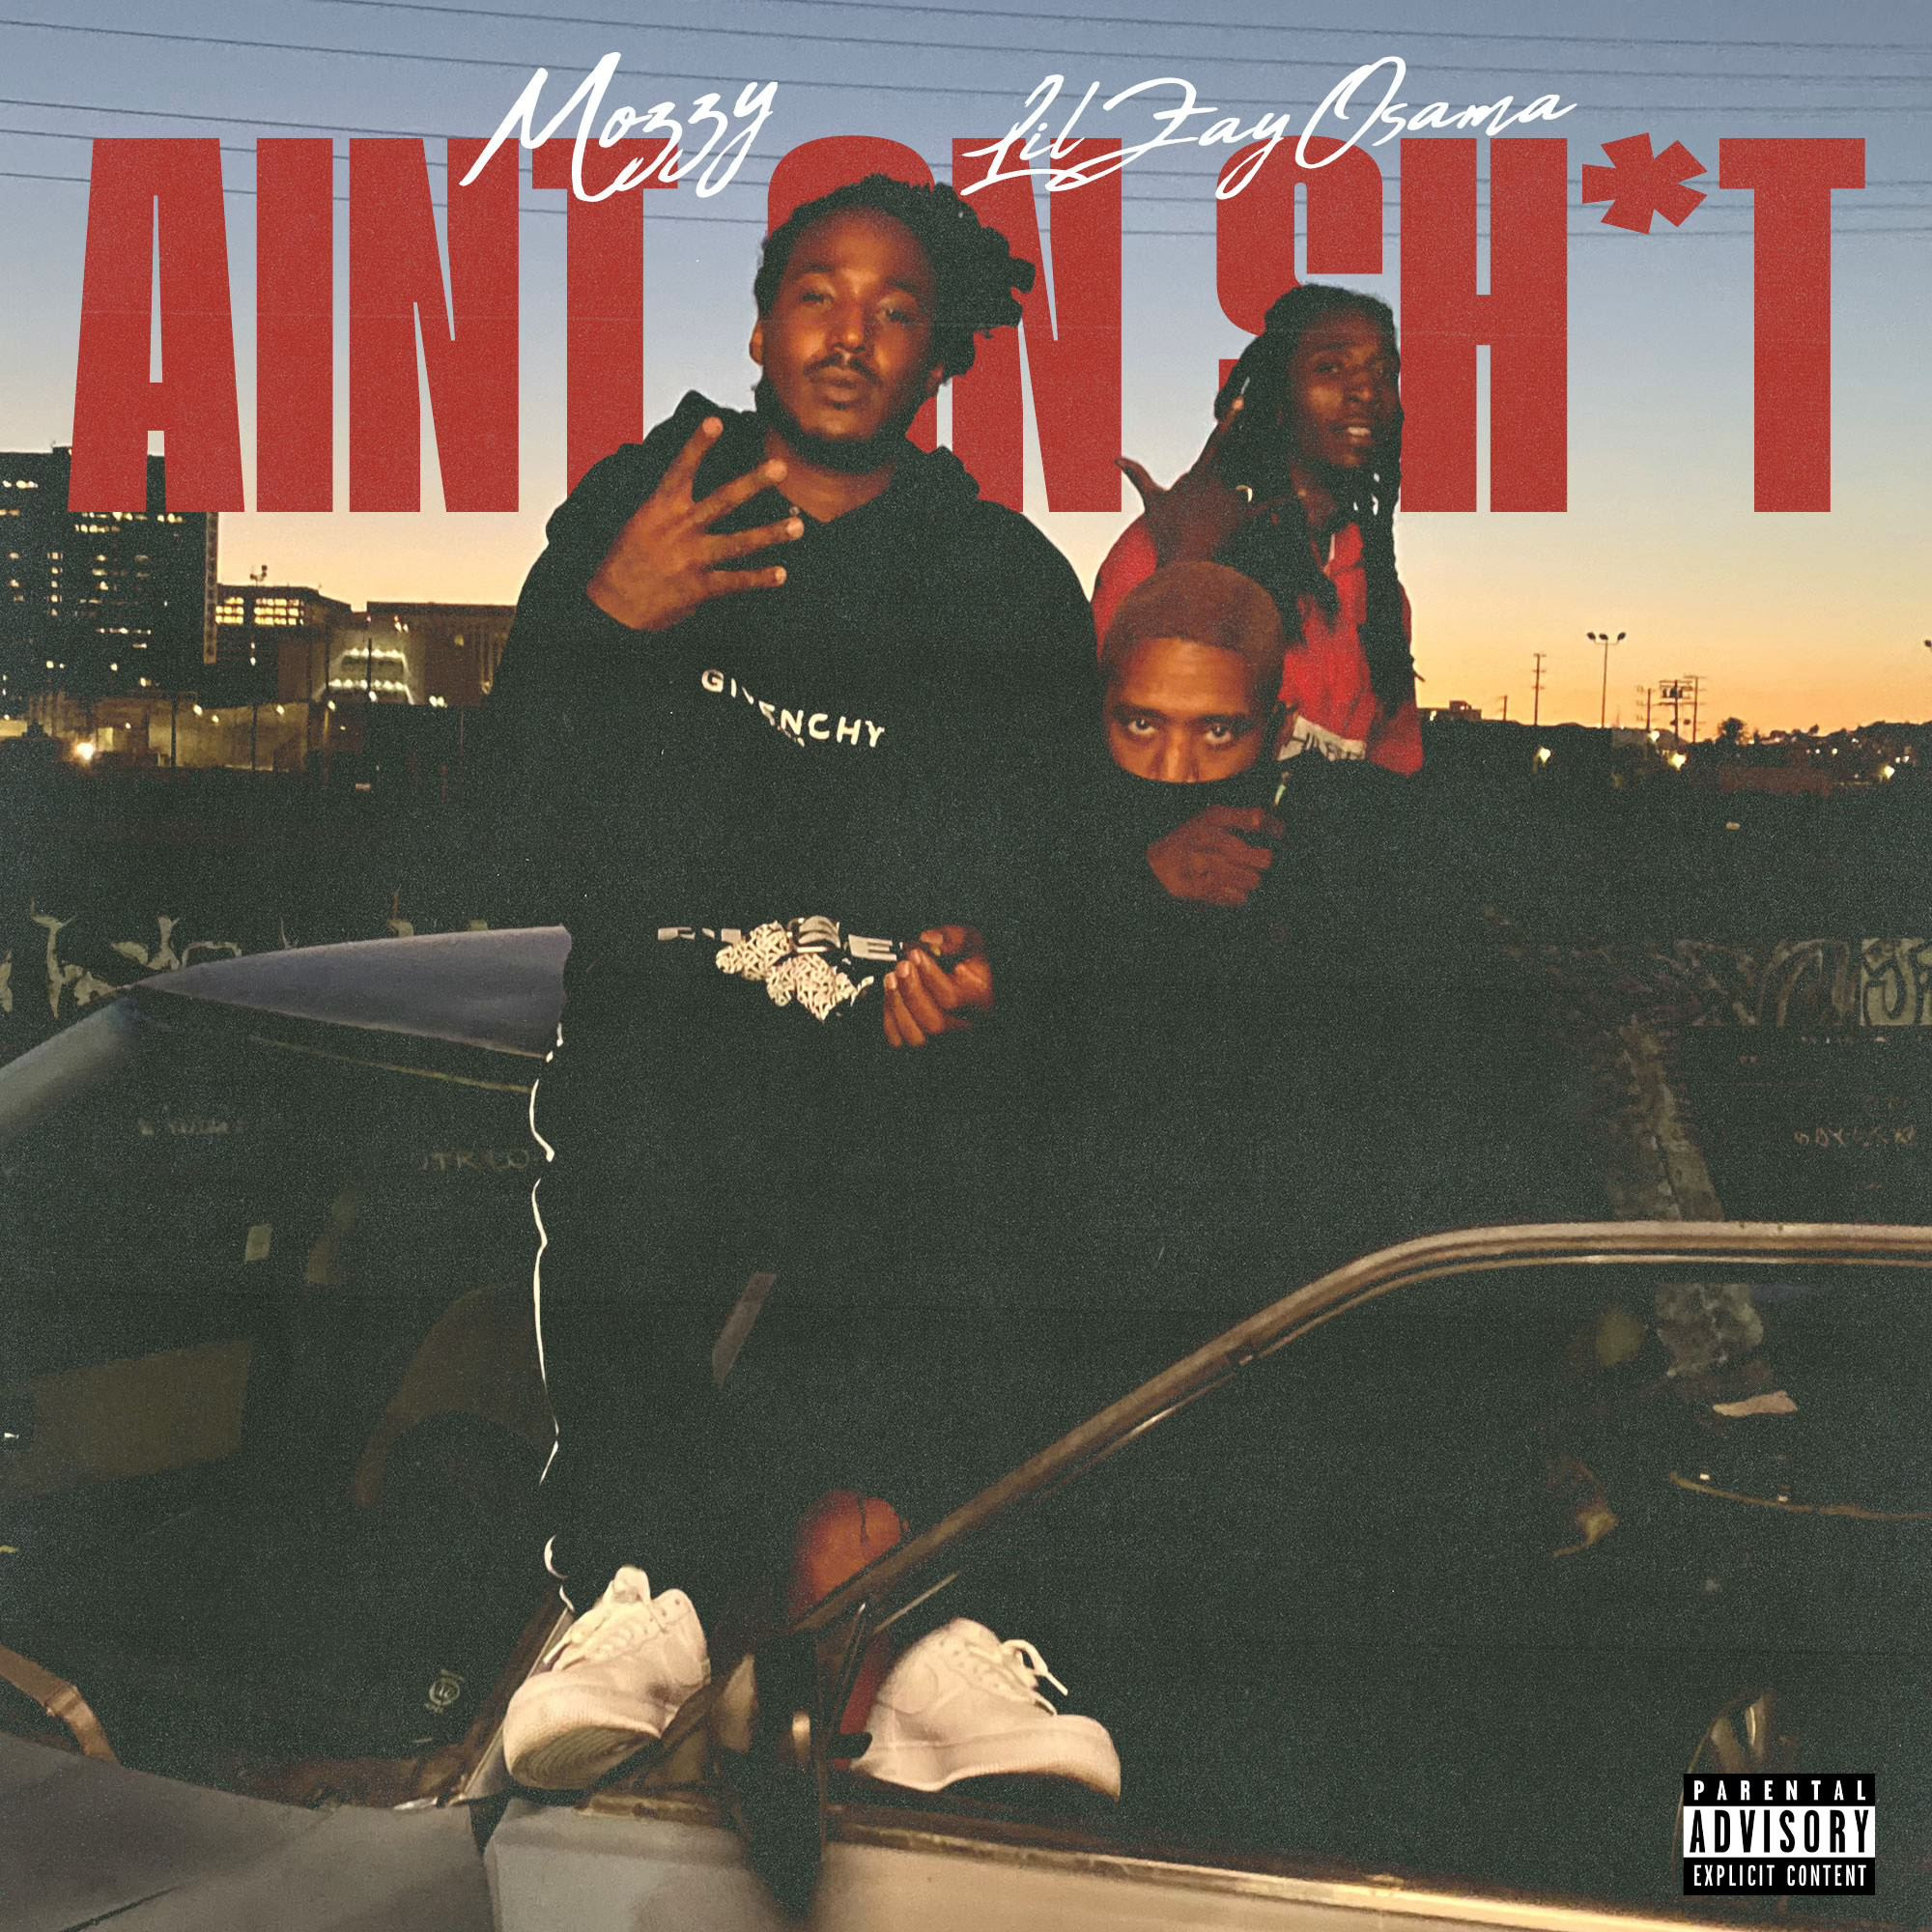 Mozzy & Lil Zay Osama Take Aim at Fakes in “Ain’t On Sh*t” Video